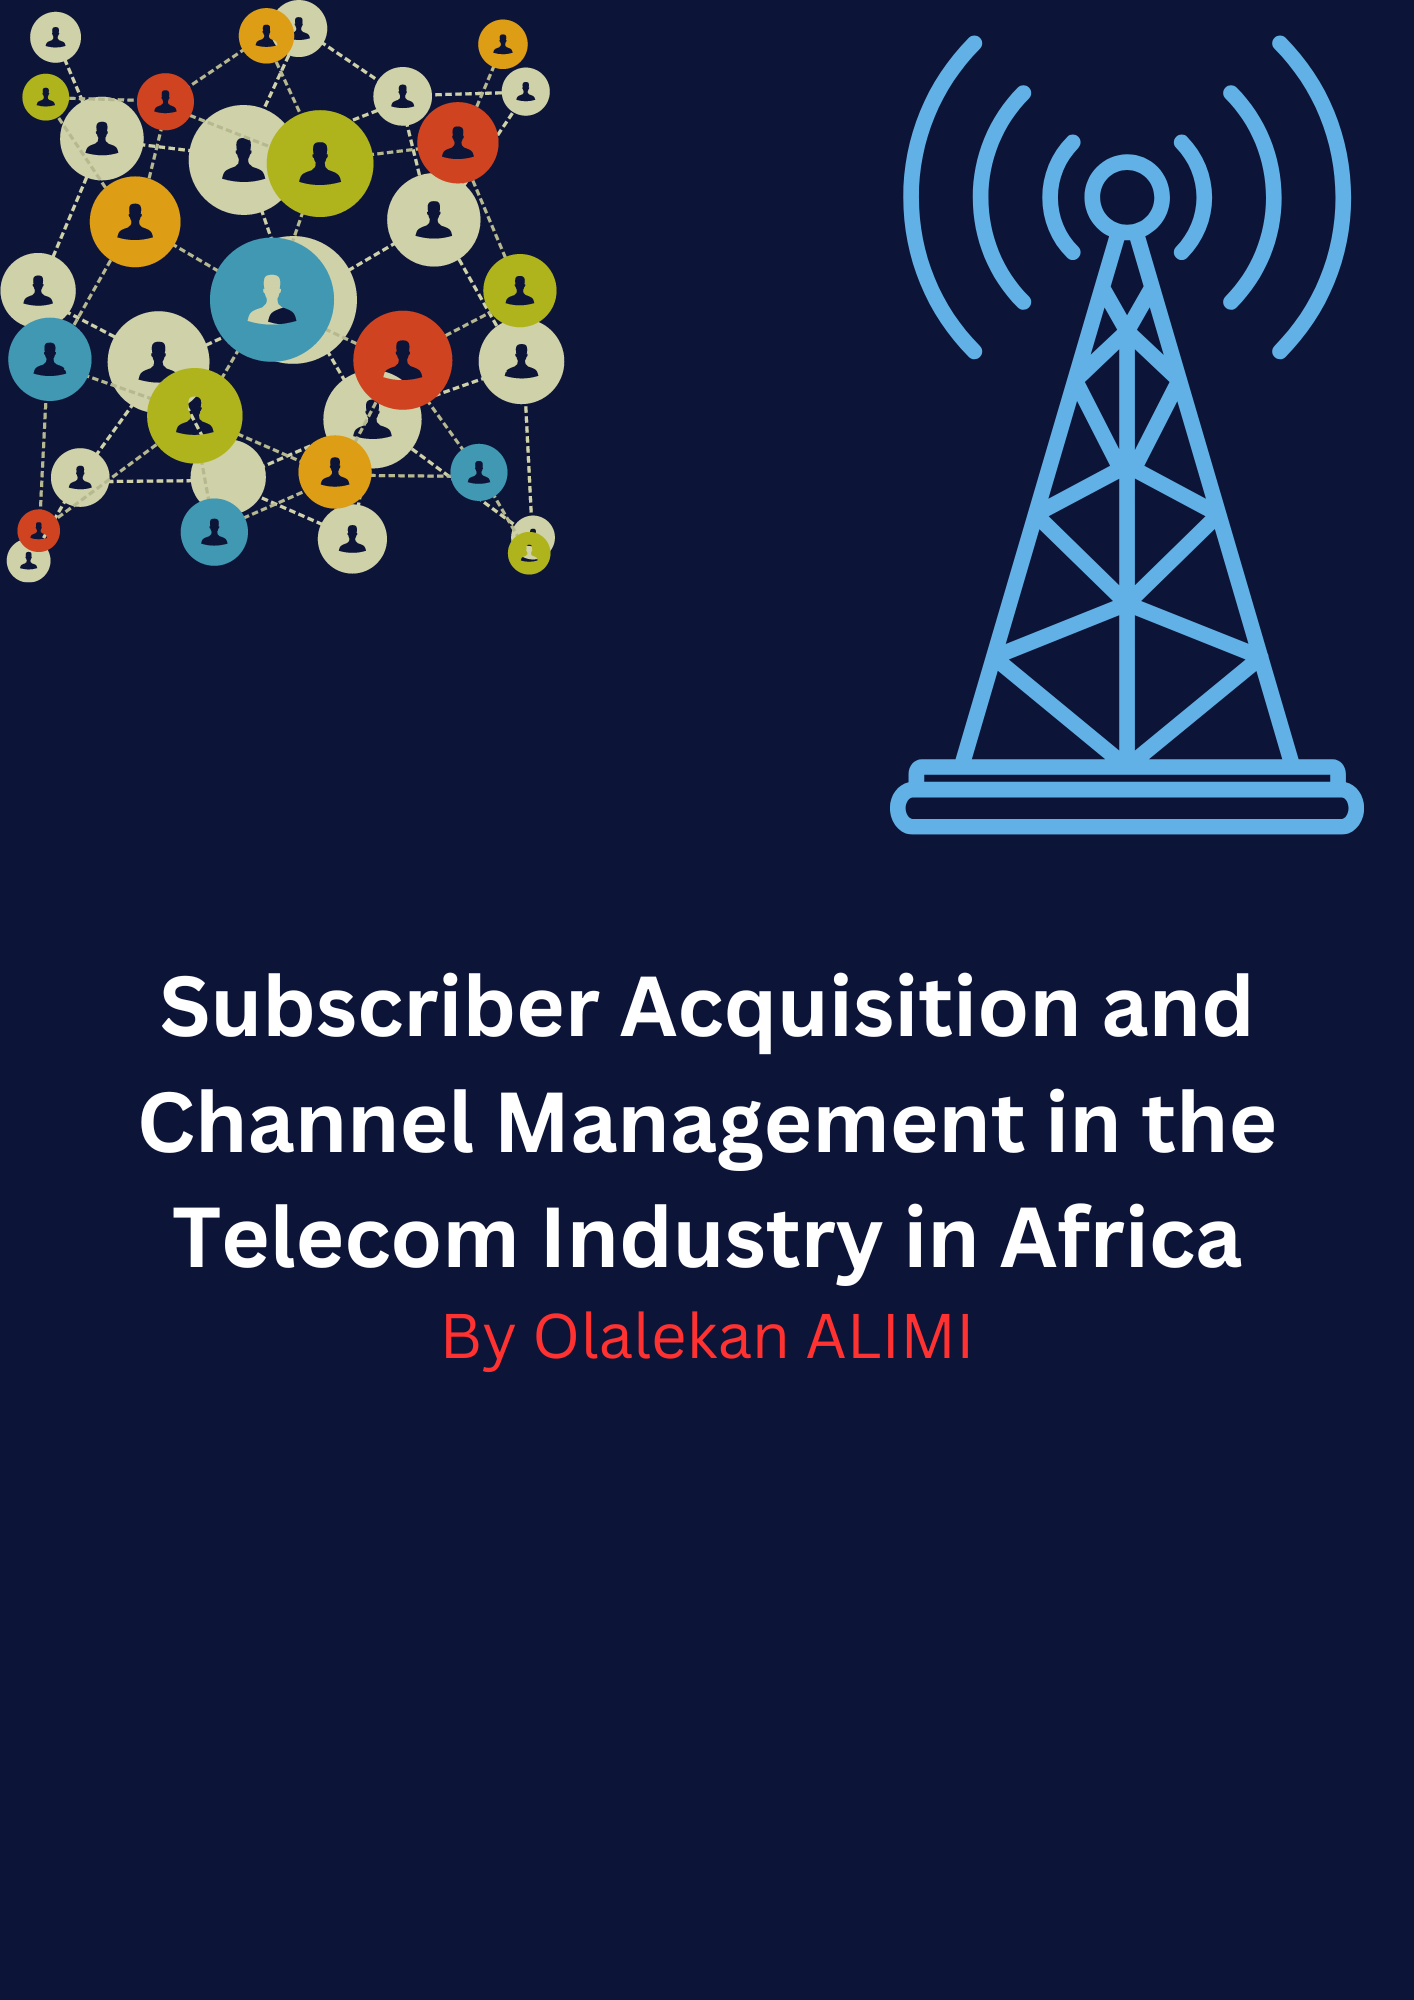 Subscriber acquisition and channel management in telecom industry in Africa rendition image